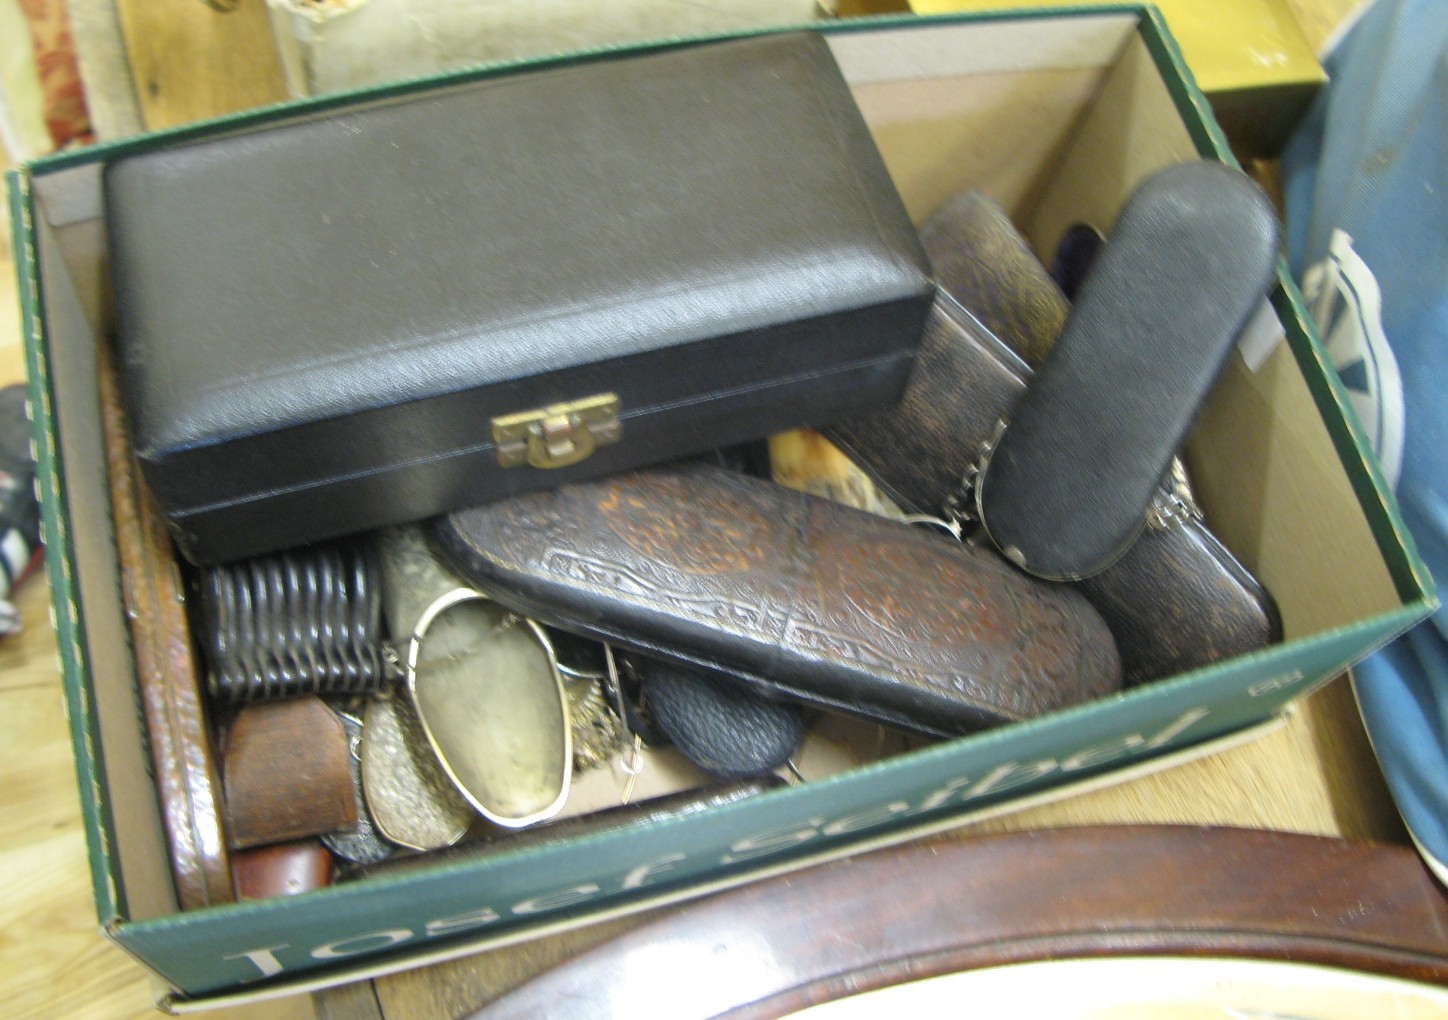 Box of lunettes, spectacles and other optical items - Sold for £300